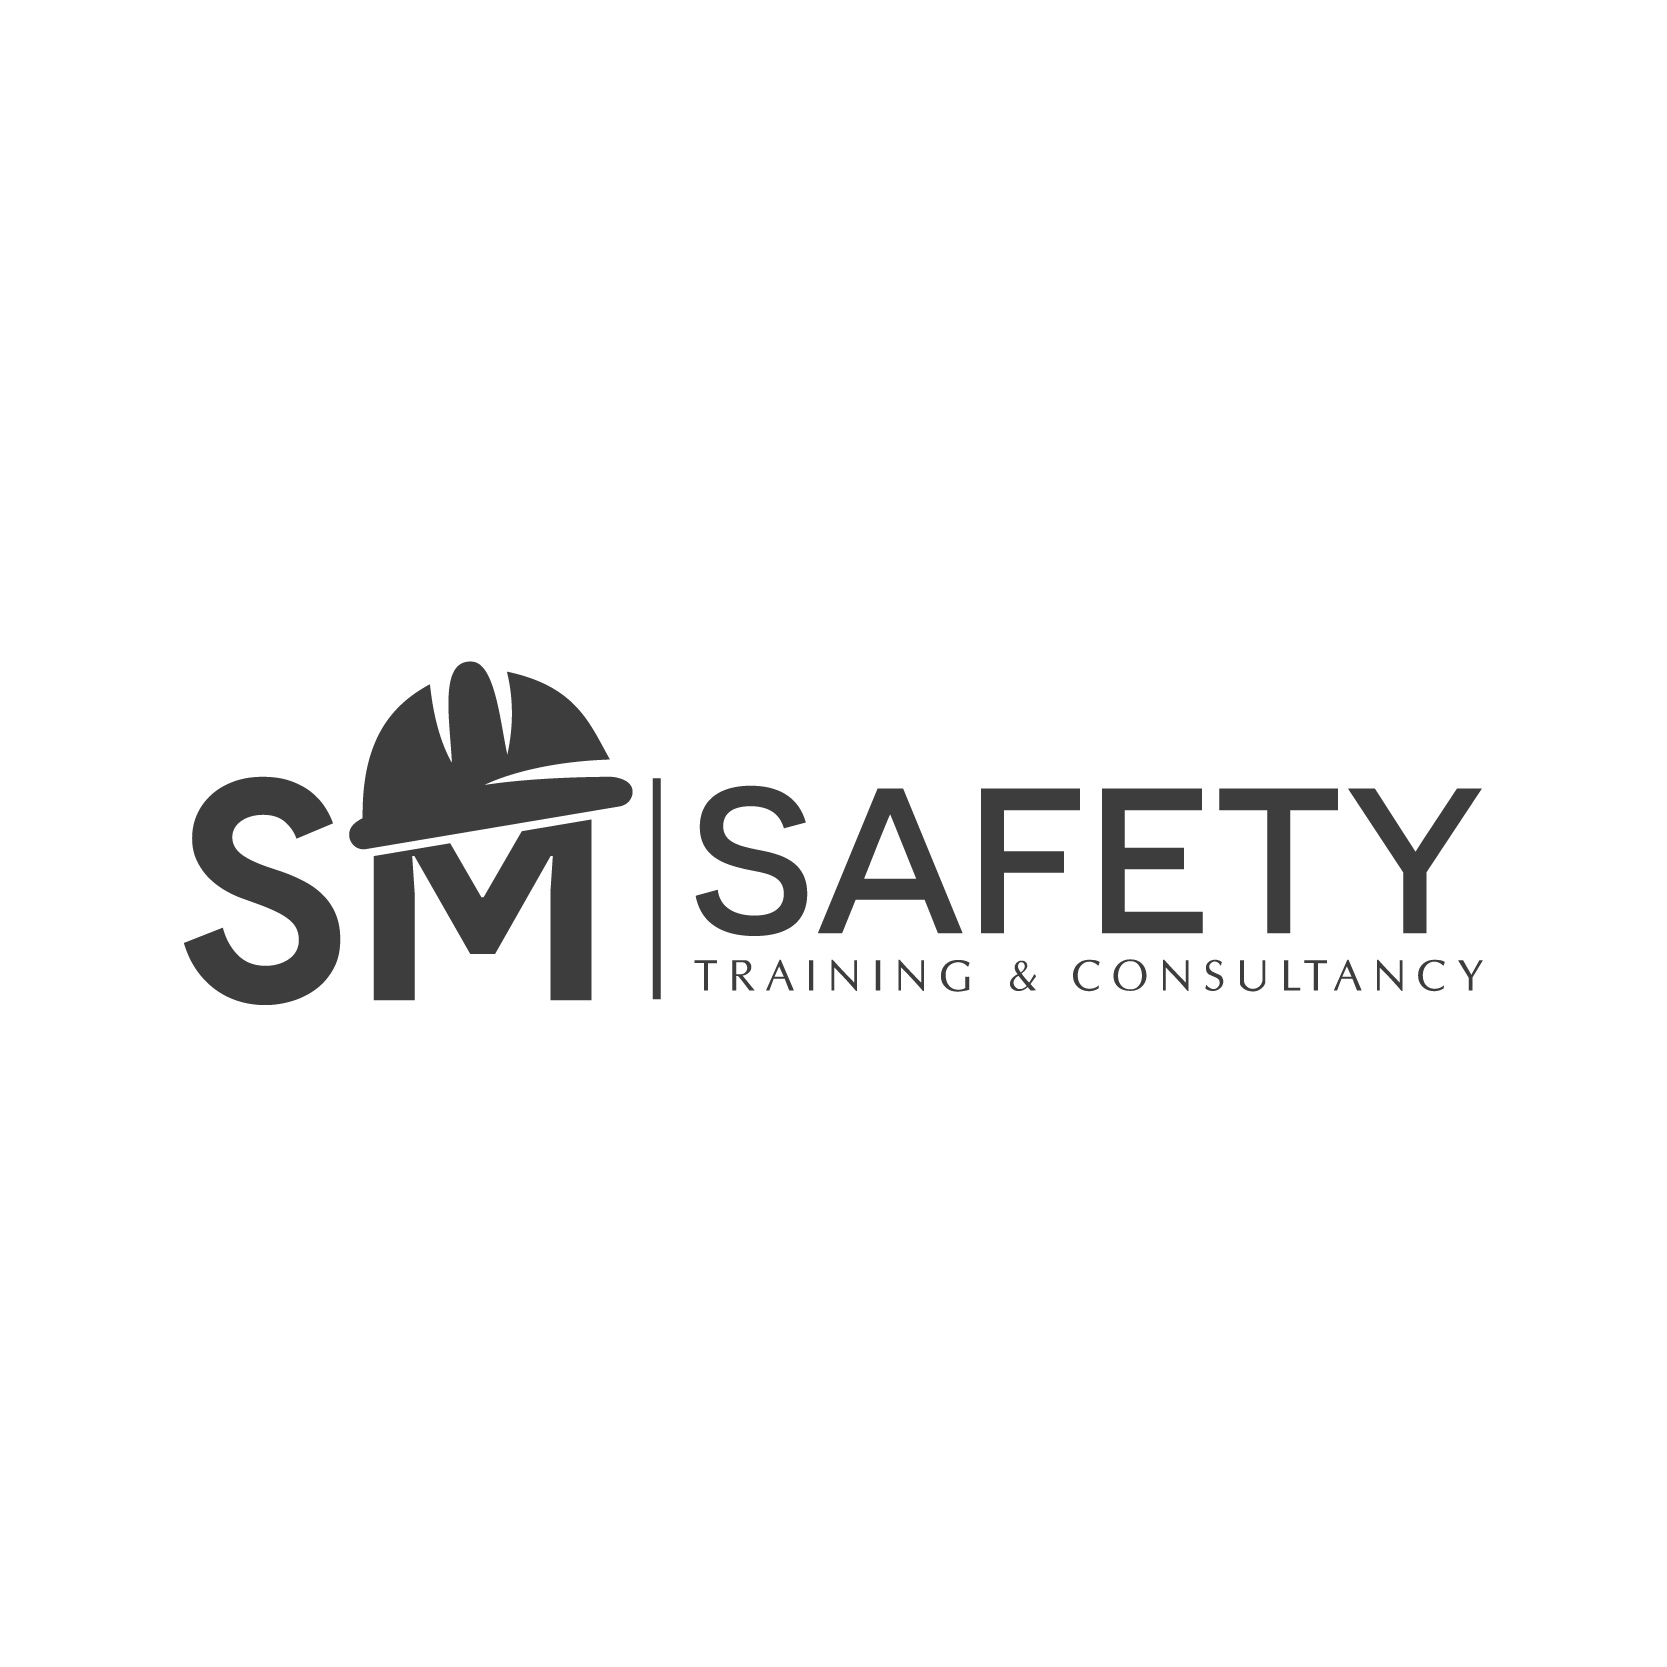 SM Safety Training & Consultancy